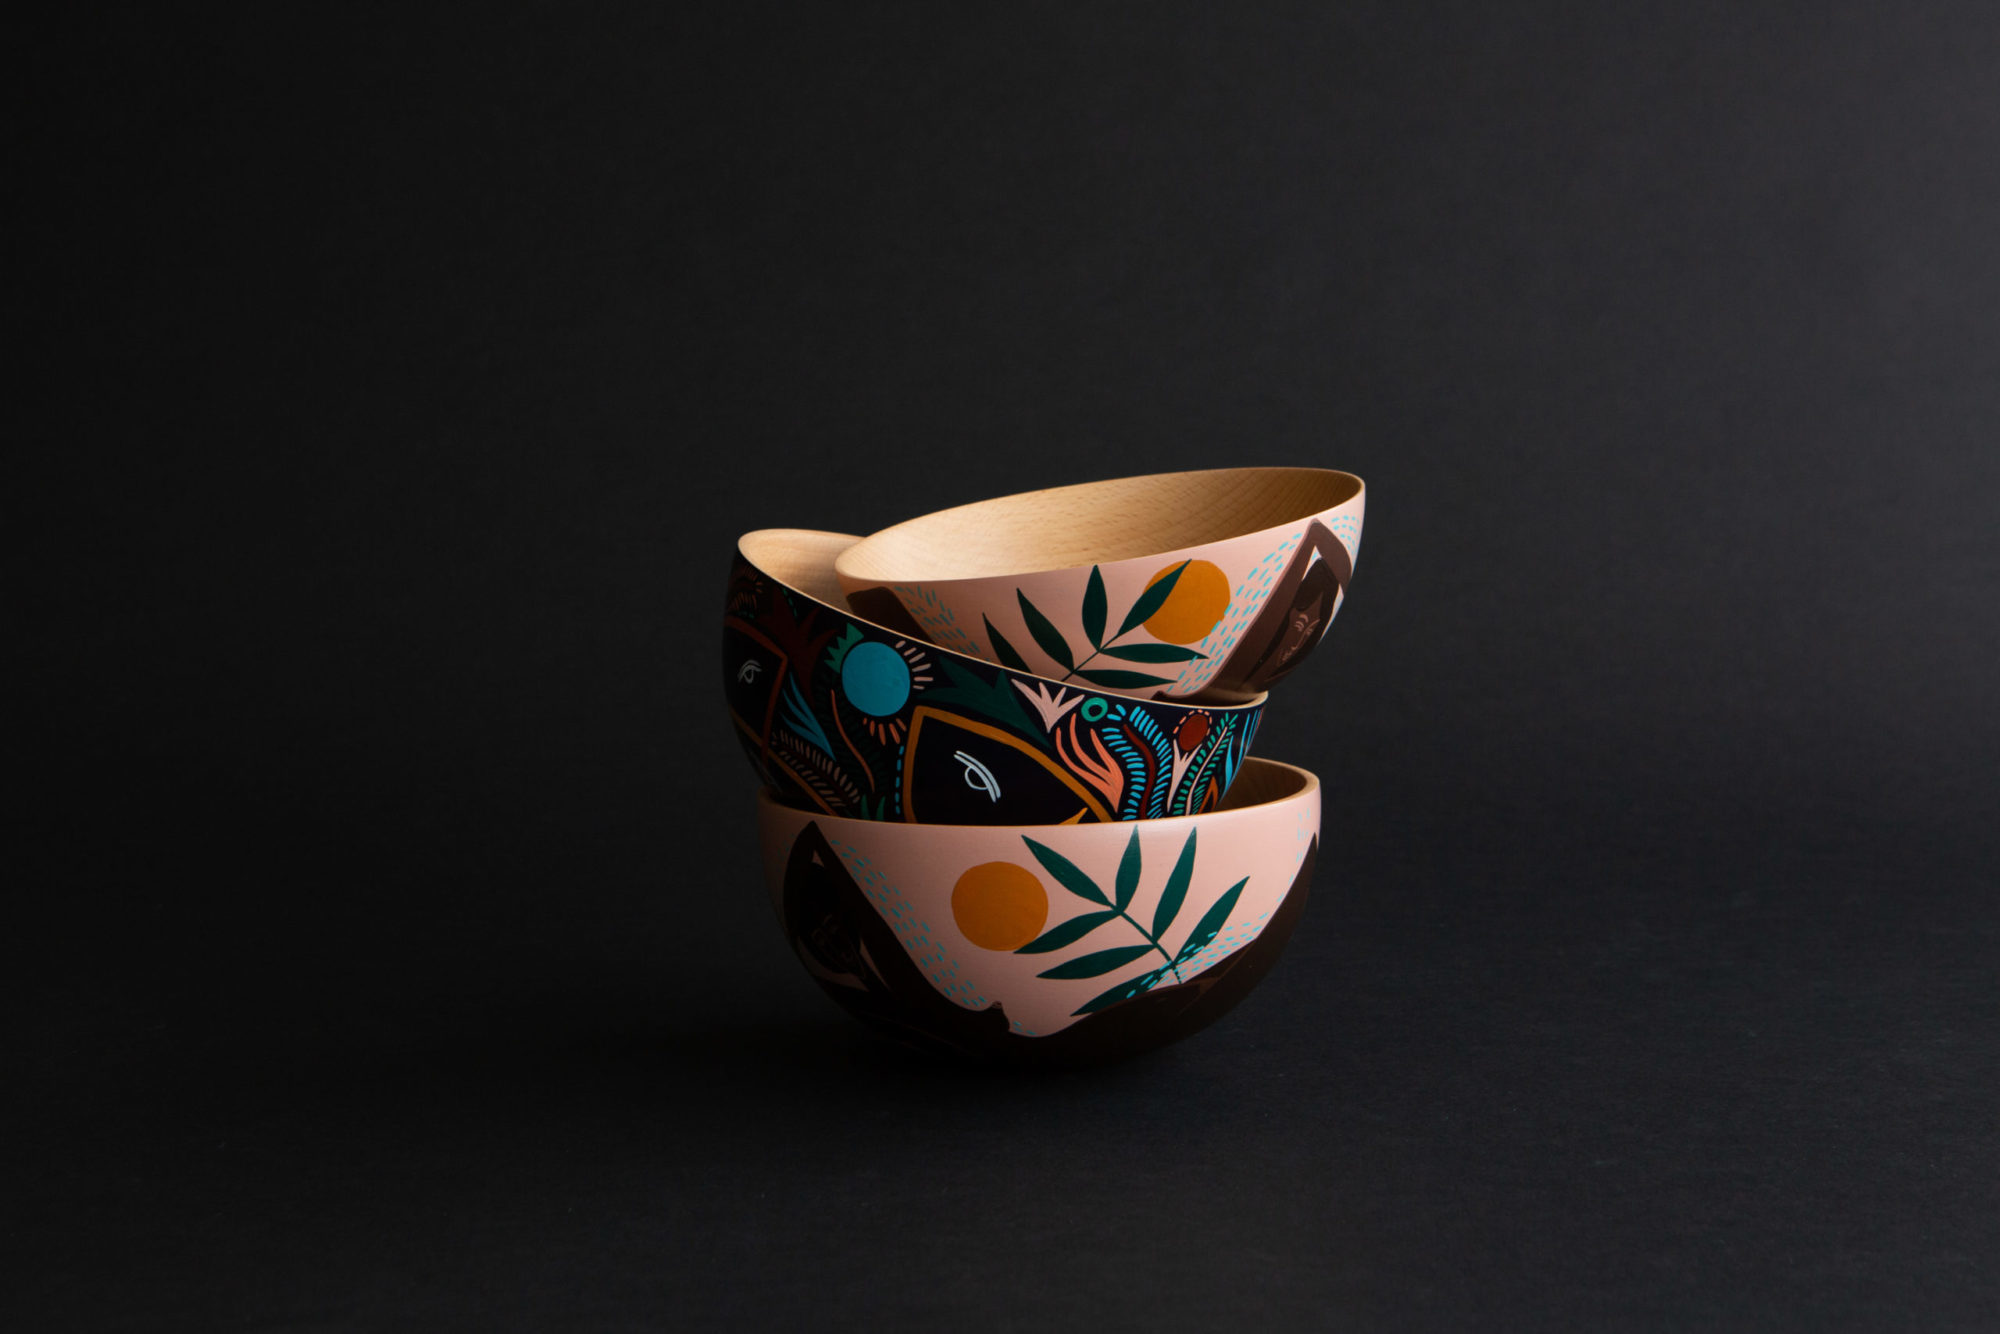 painted bowls on a dark background